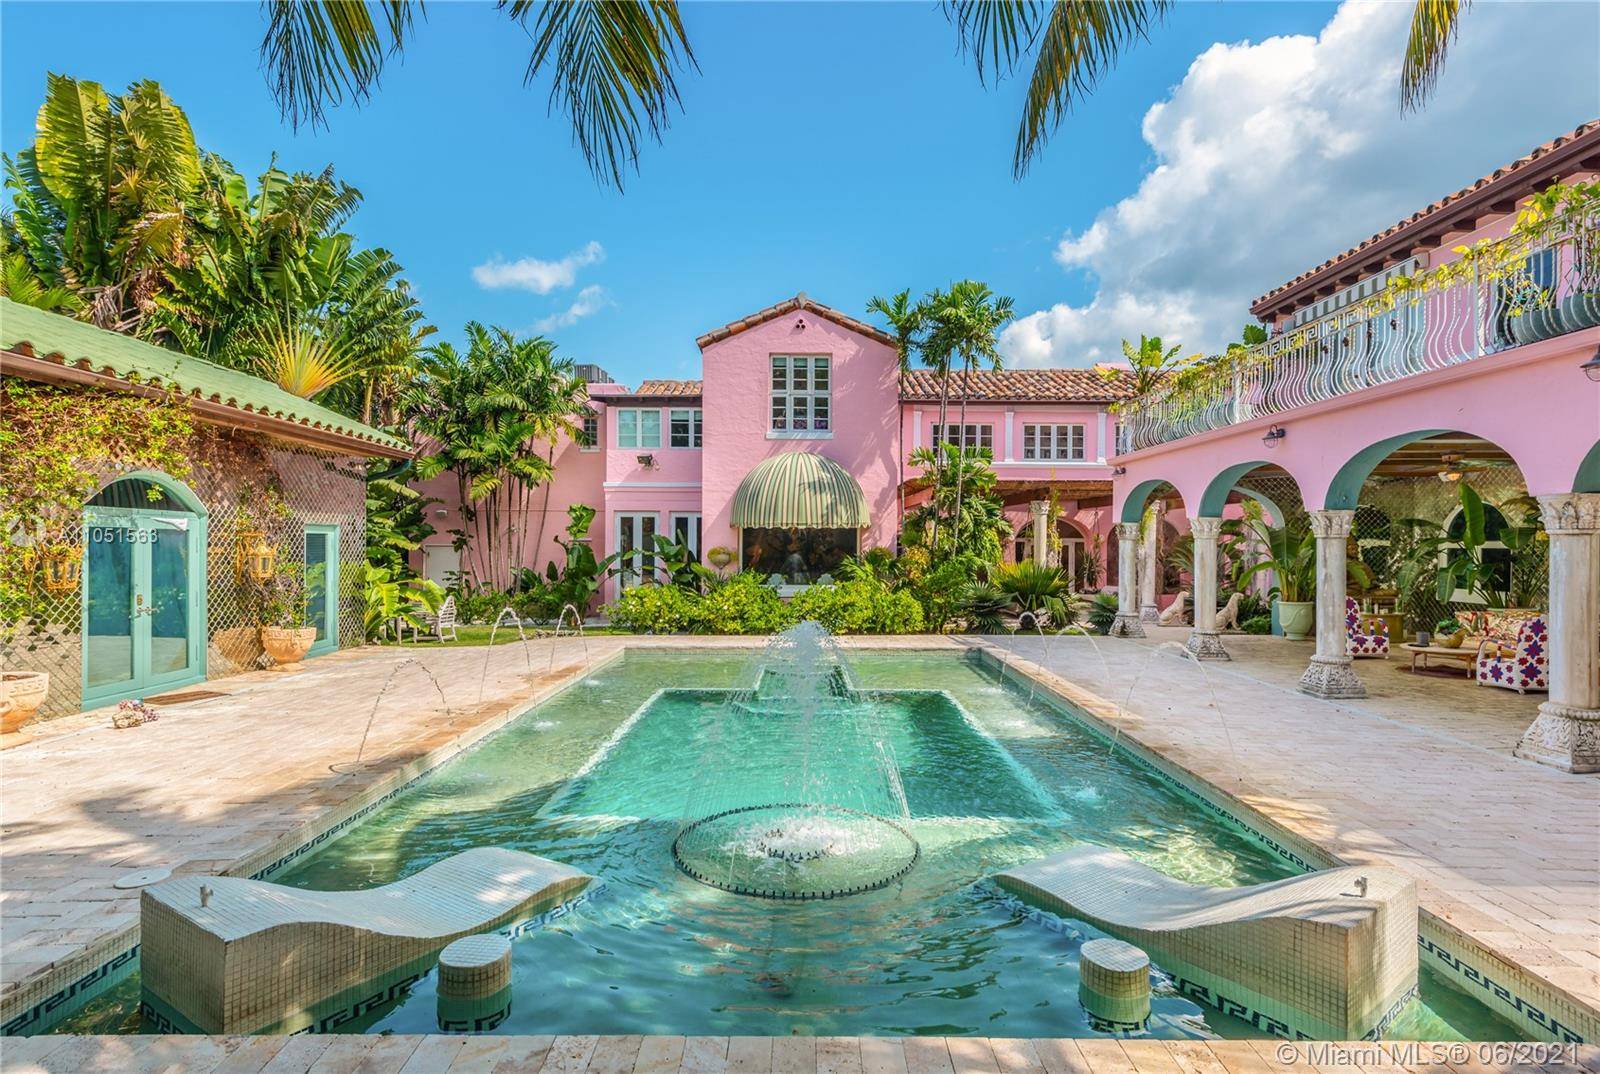 This classic Mediterranean Revival estate was meticulously restored and updated by Ximena Caminos, as her personal refuge and escape.